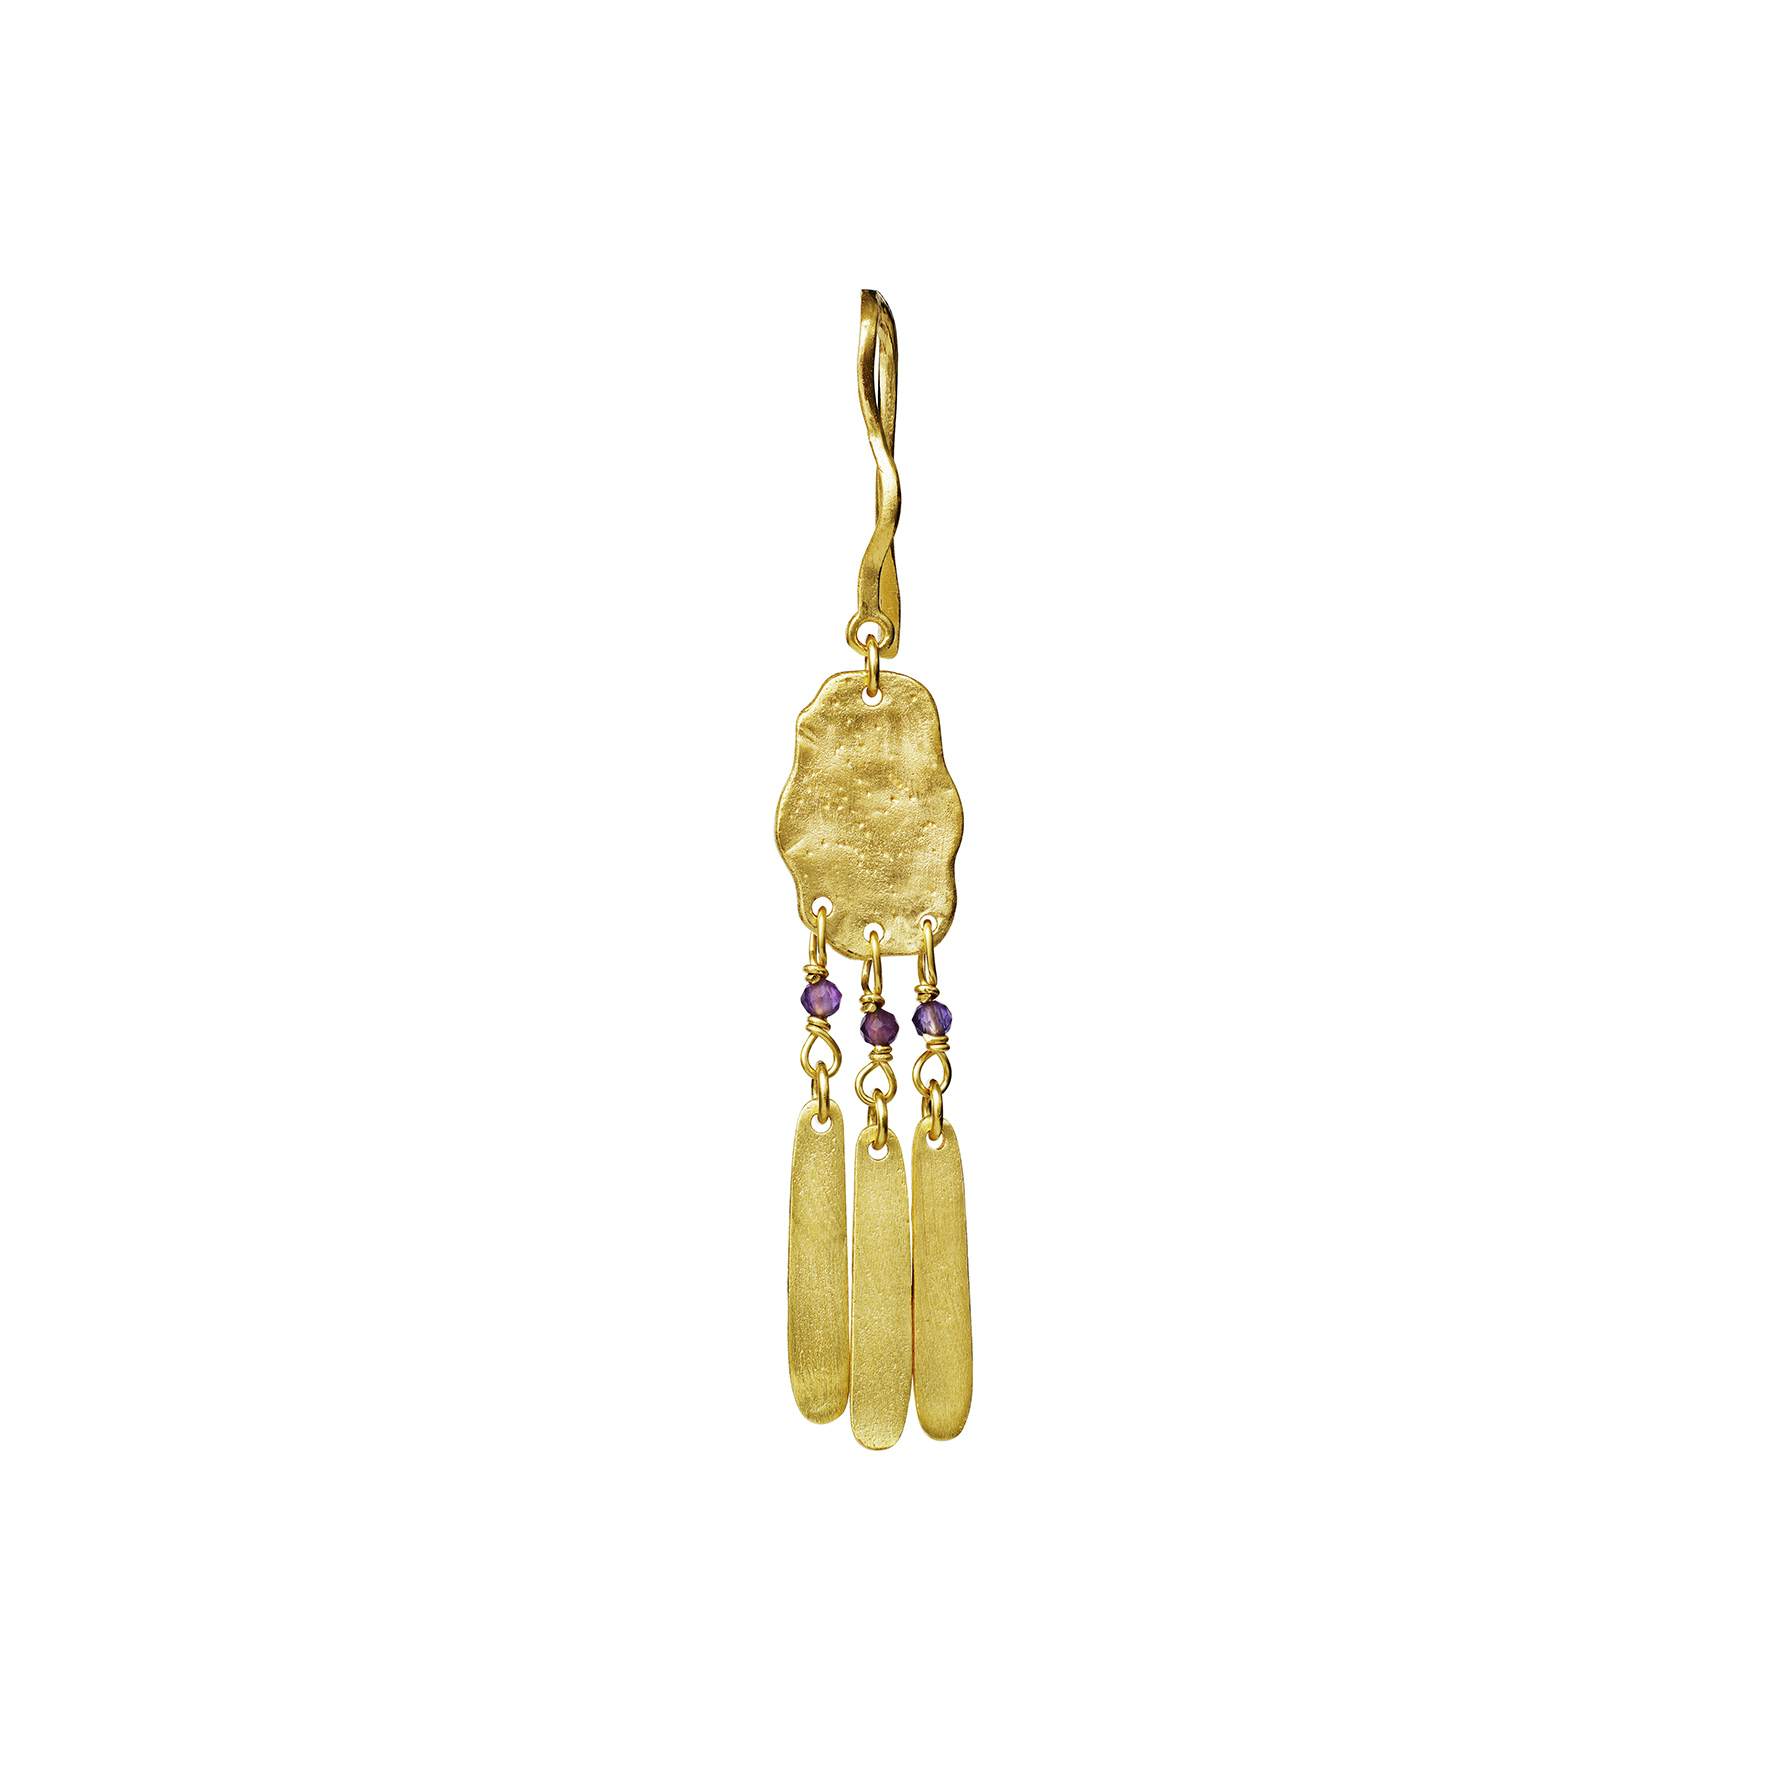 Evalina Earring from Maanesten in Goldplated-Silver Sterling 925